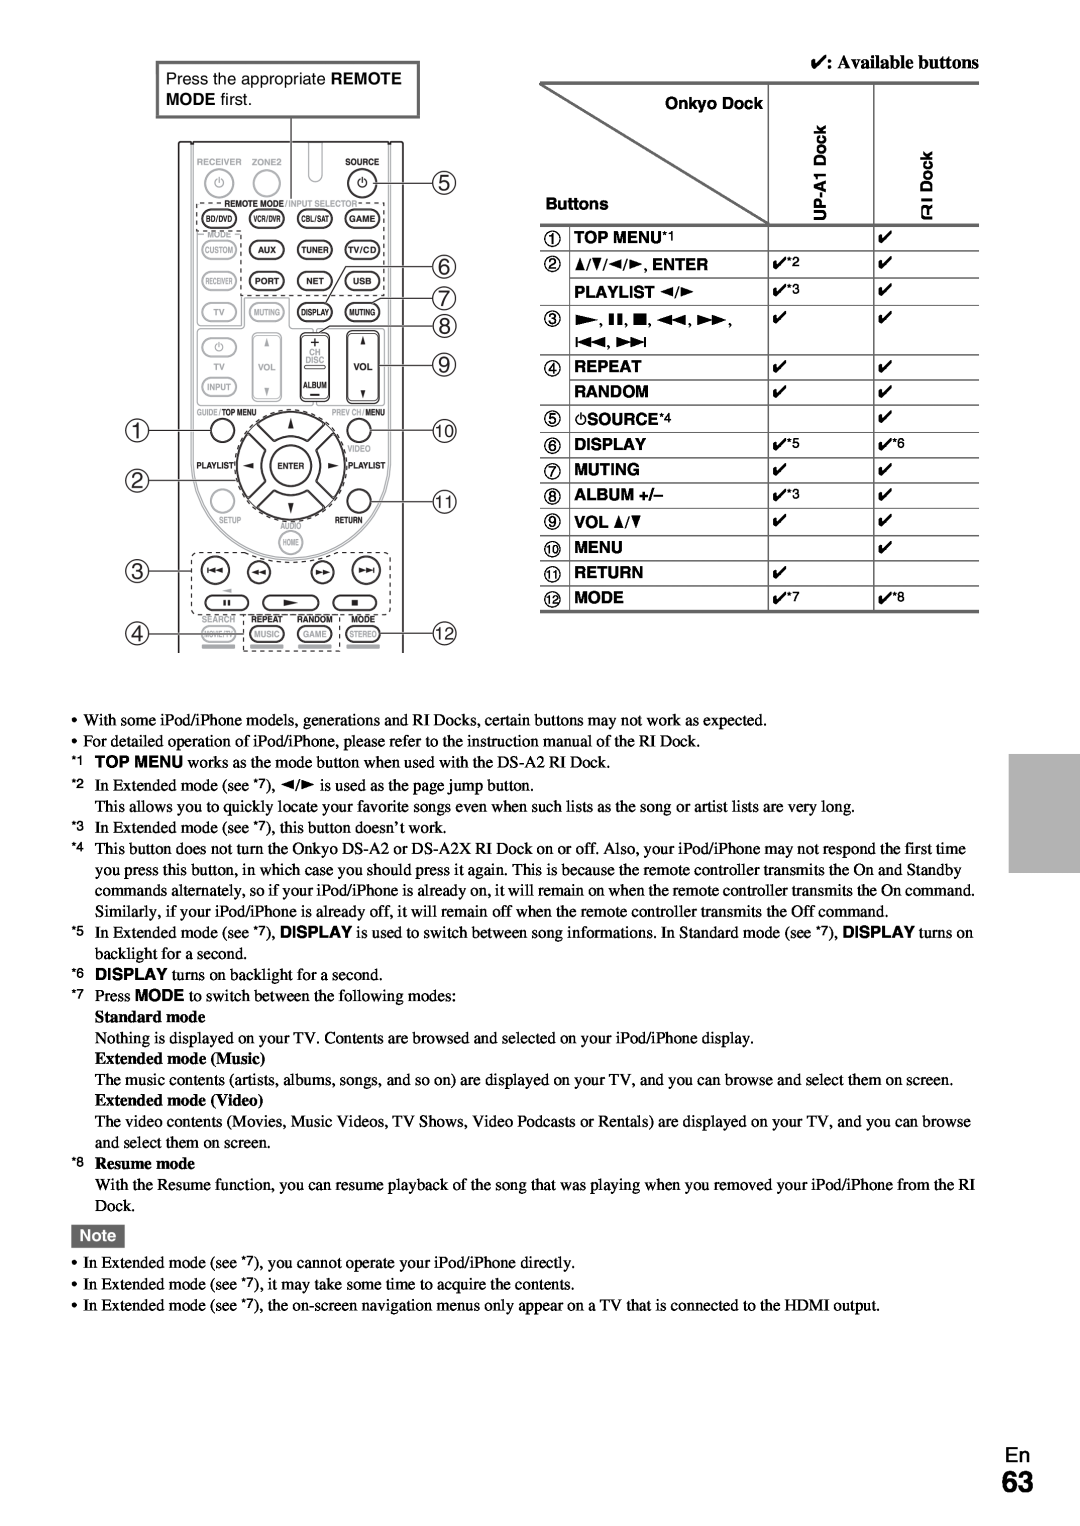 Onkyo HT-R990 instruction manual Available buttons 